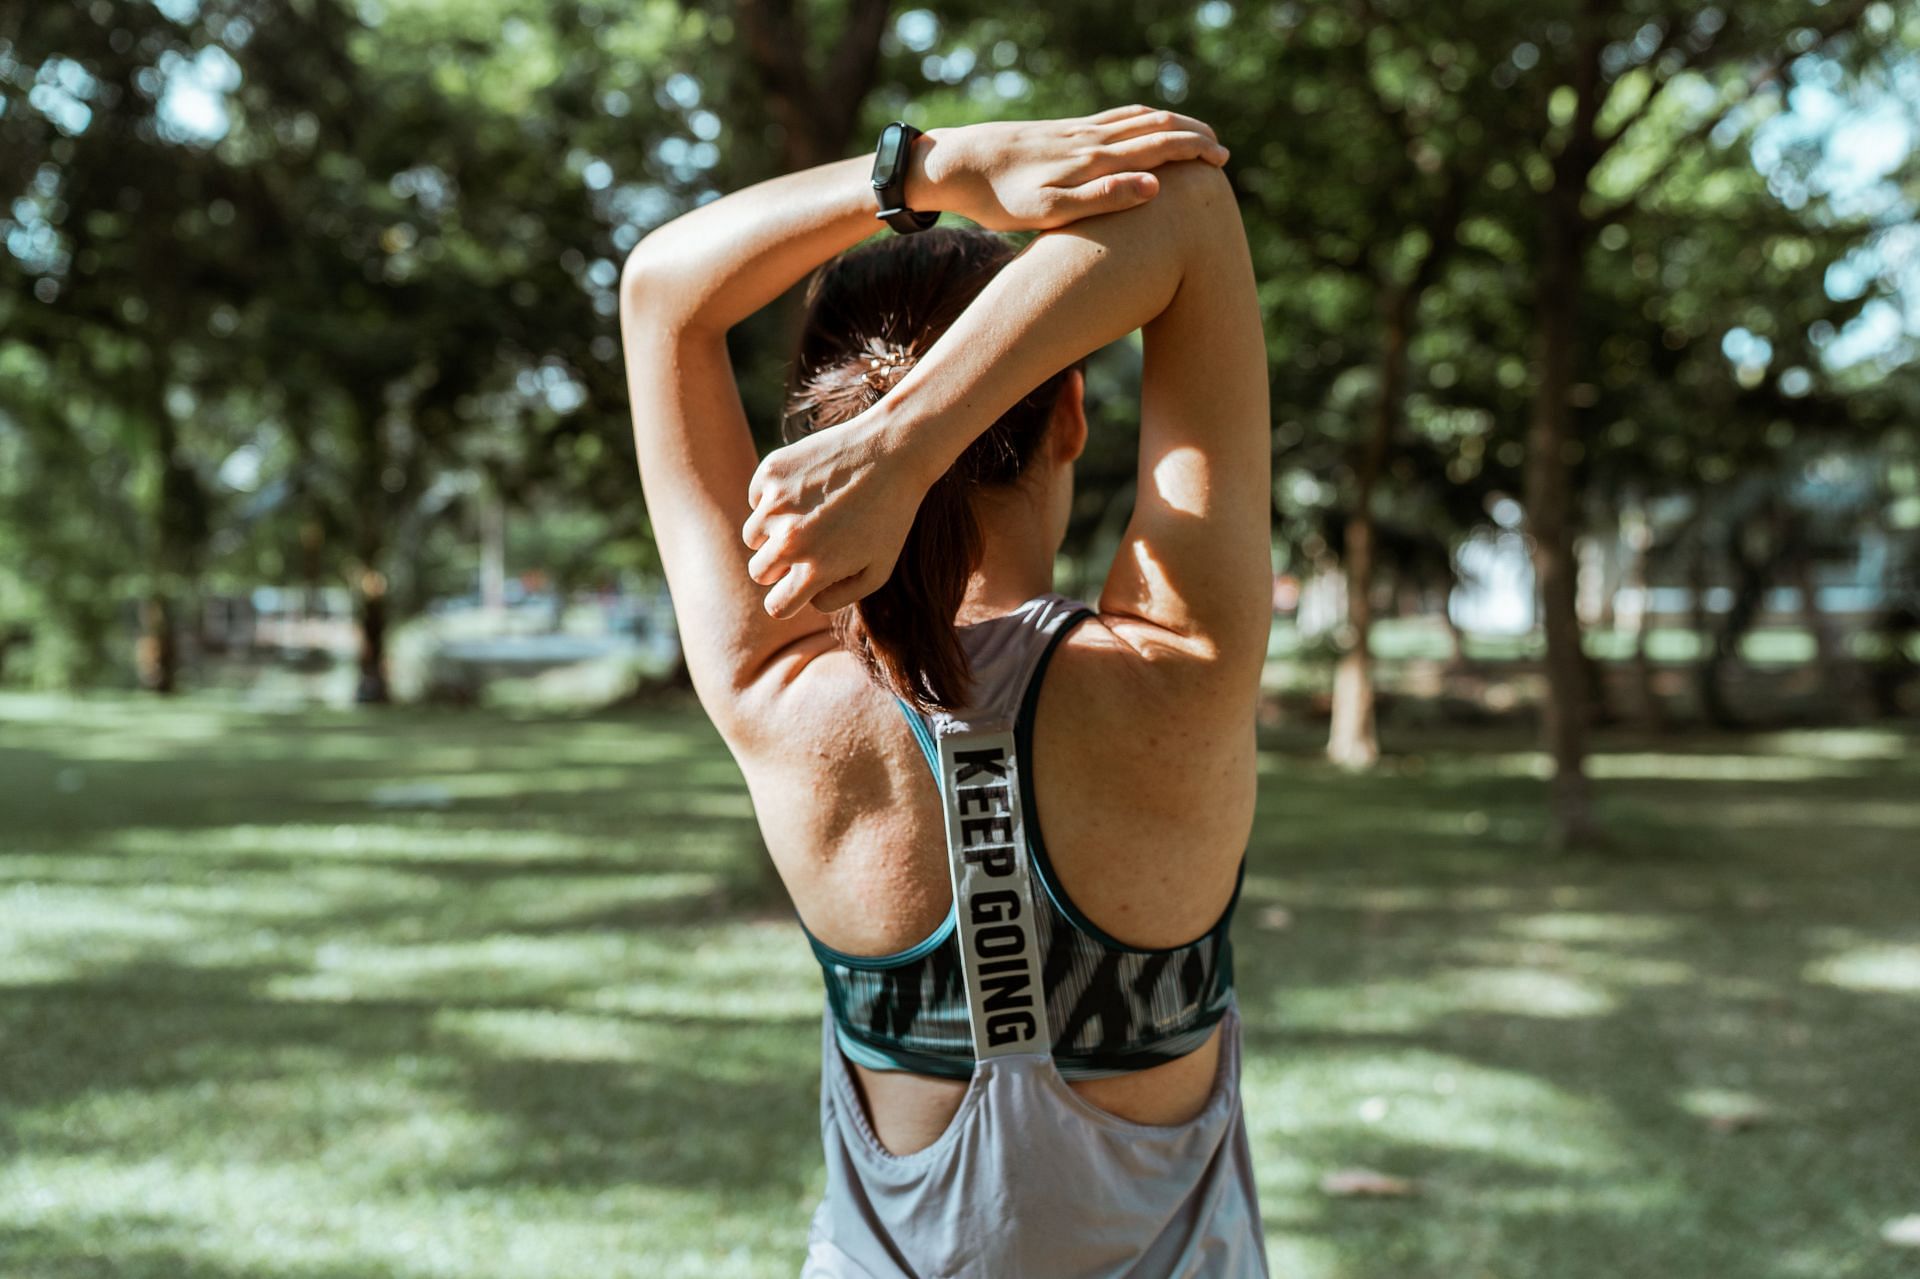 You may have difficulty moving your back or twisting and bending. (Photo via Pexels/Ketut Subiyanto)